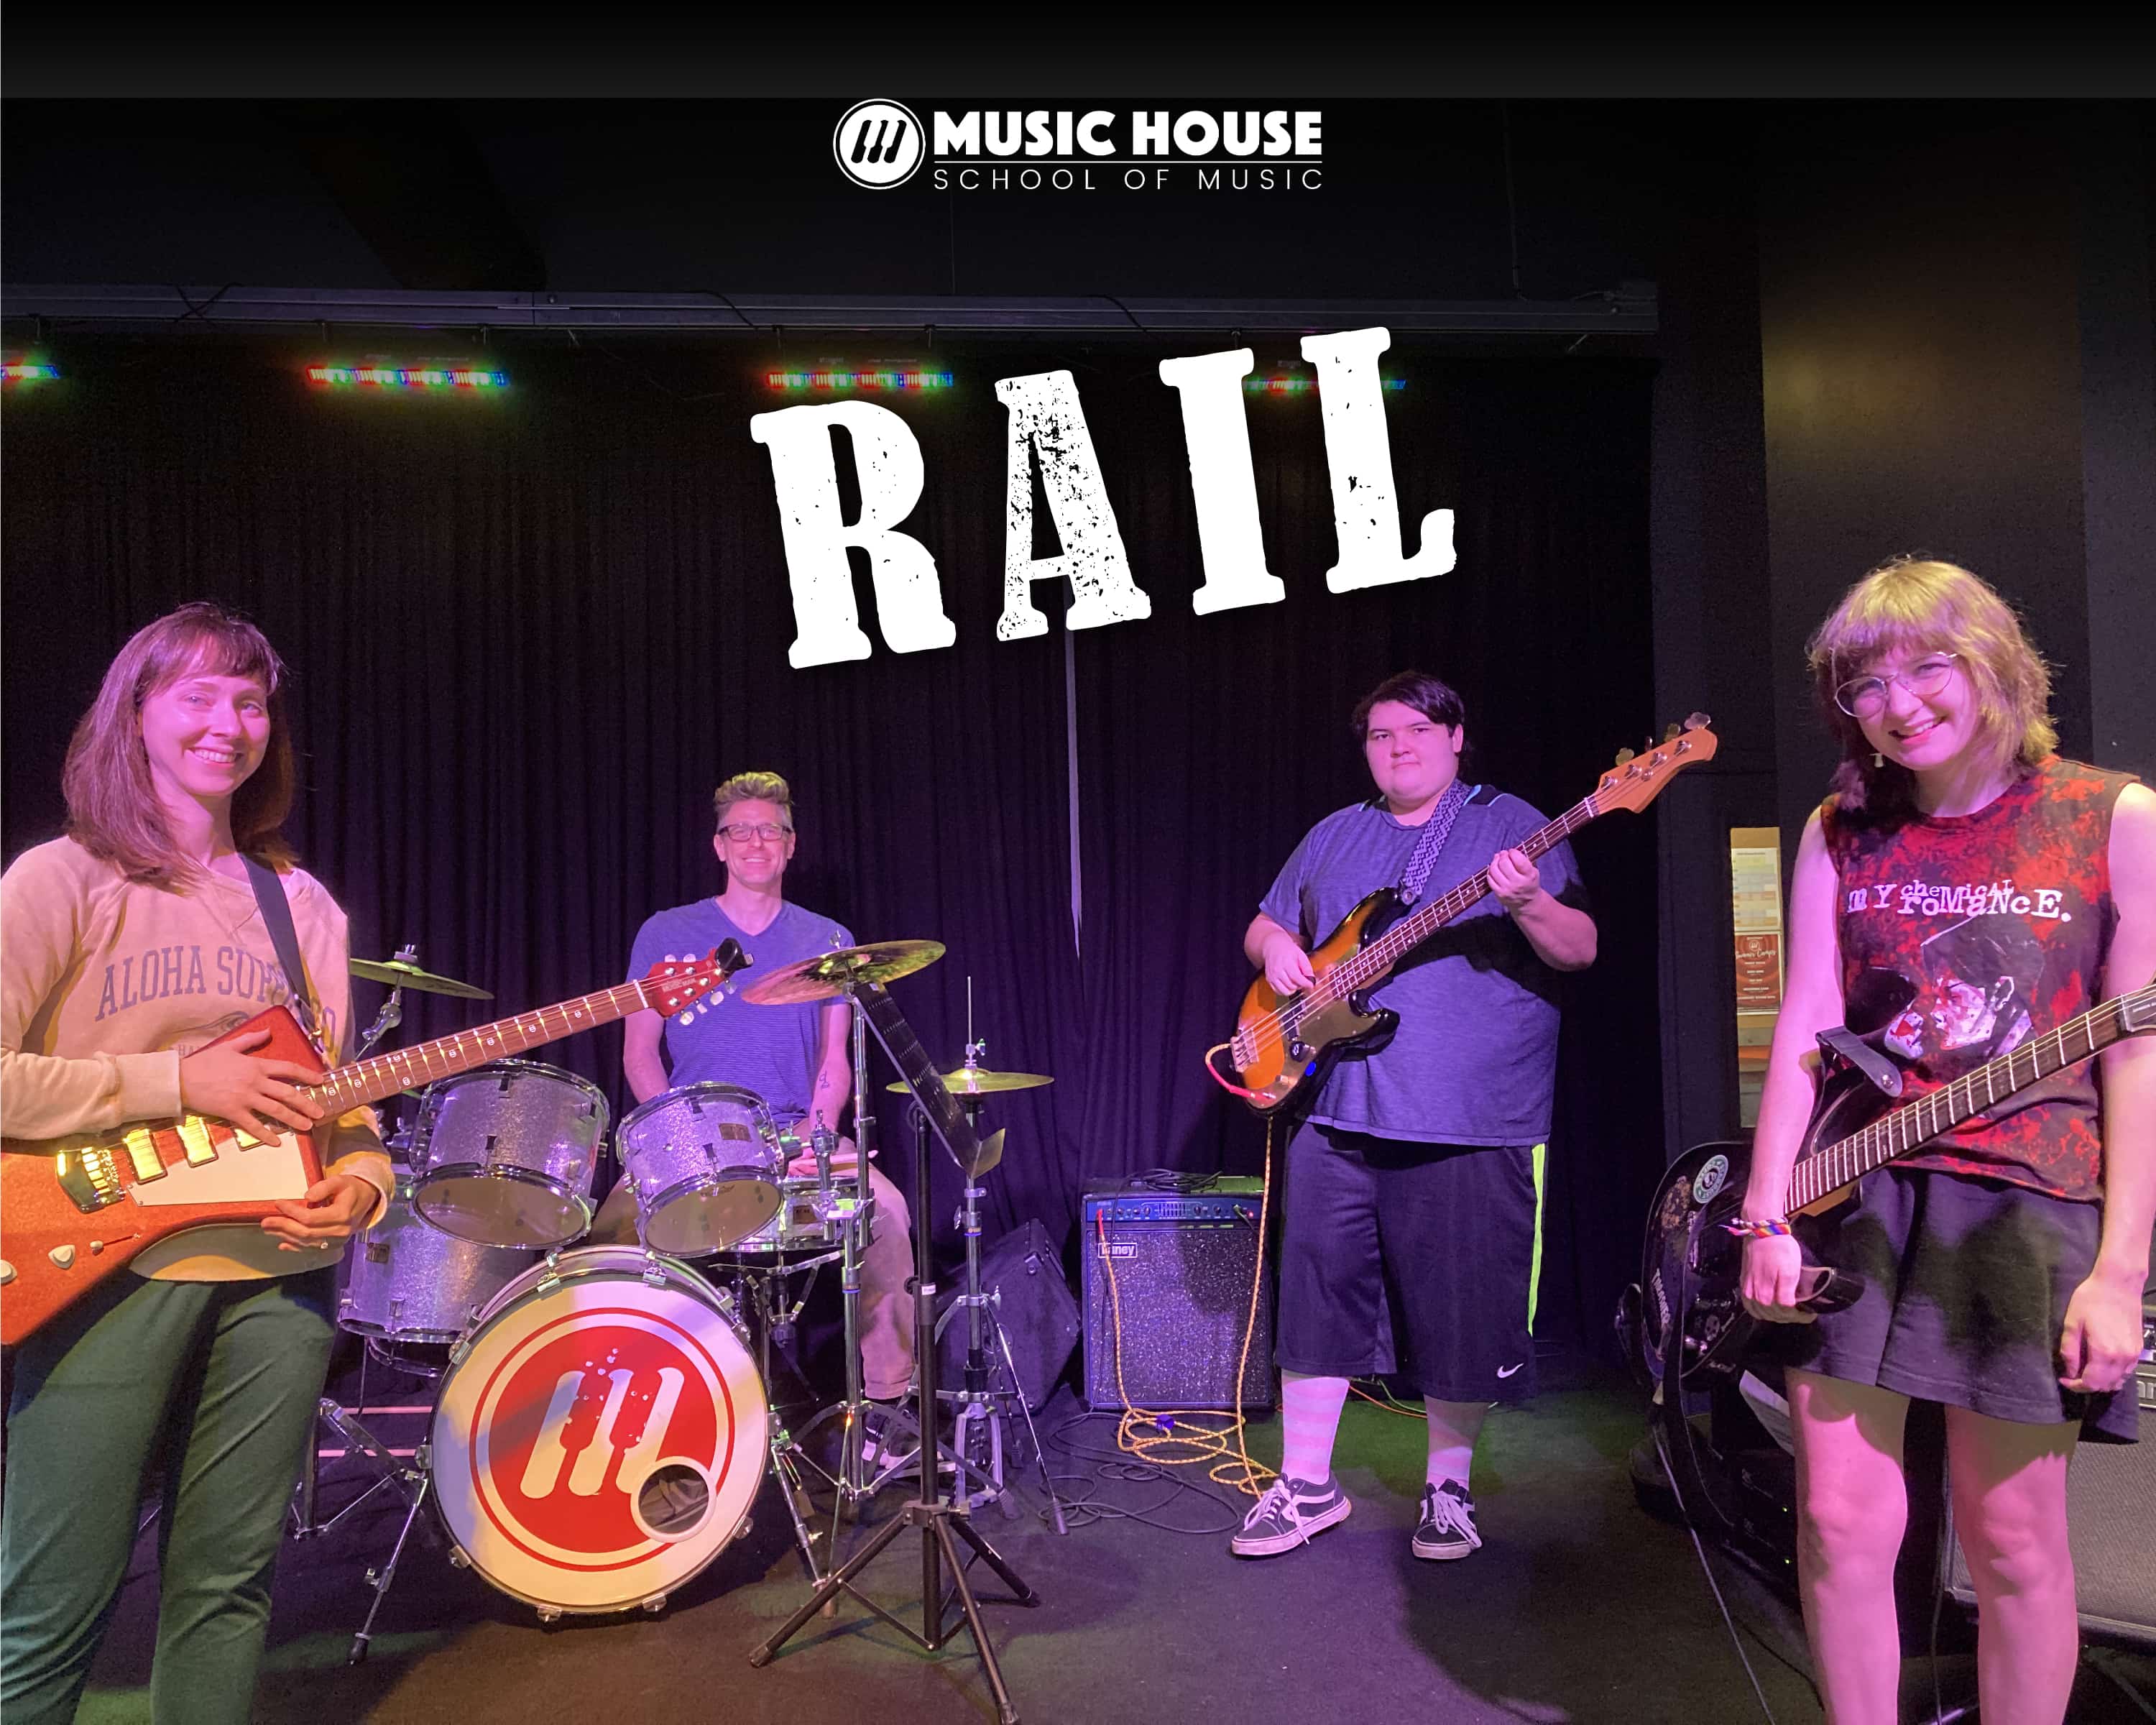 Getting to Know “Rail”